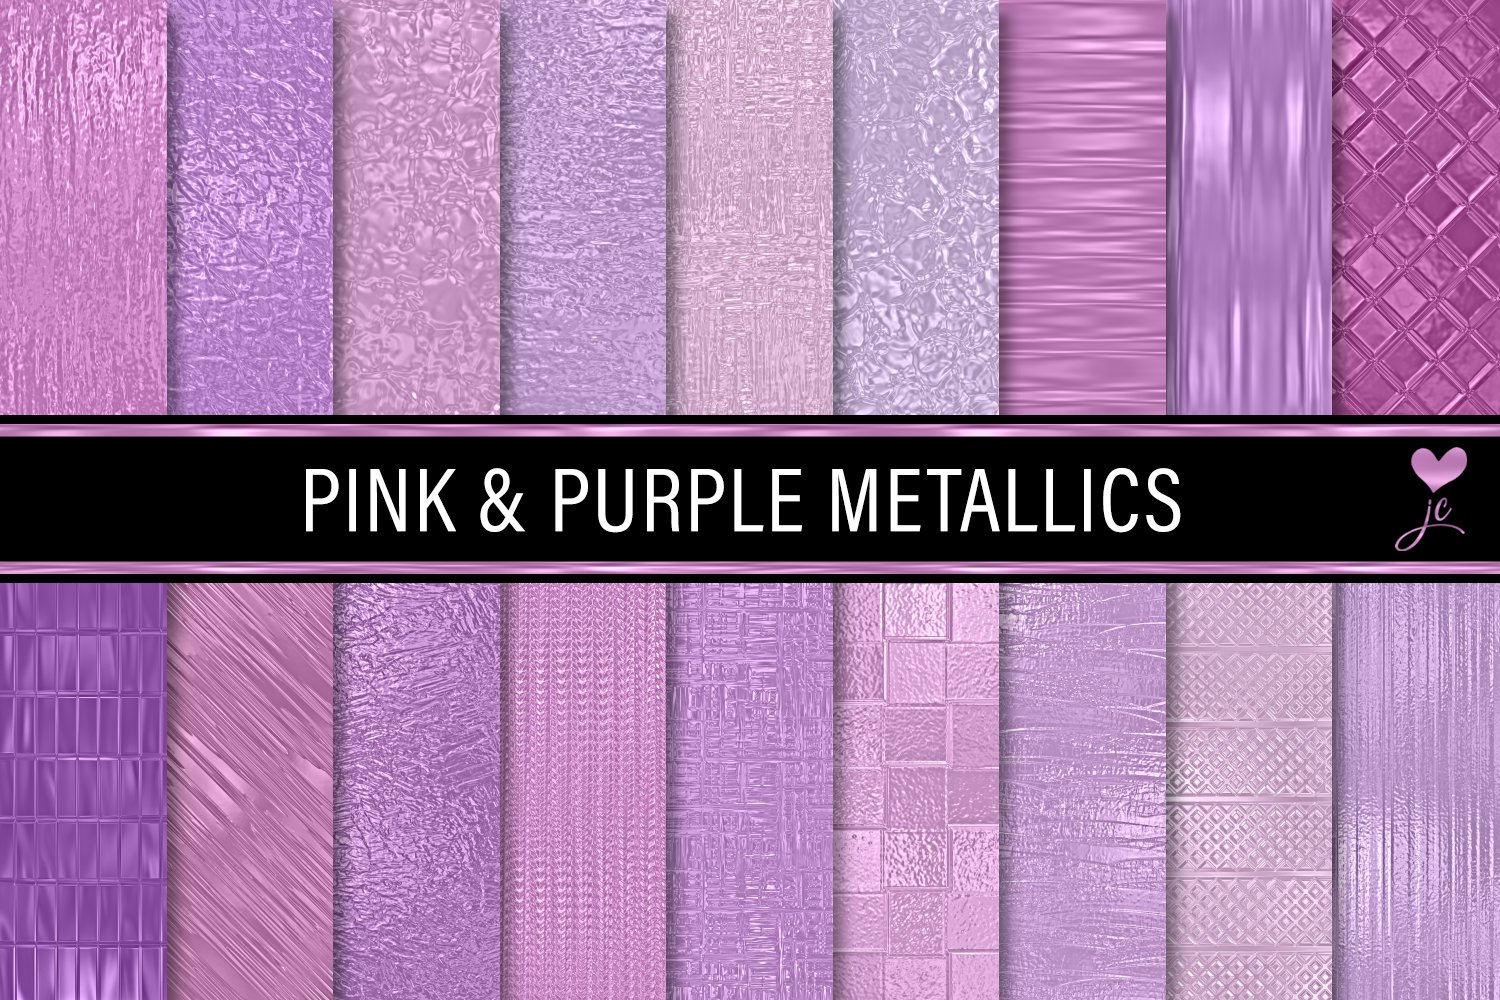 Pink and Purple Metallics cover image.